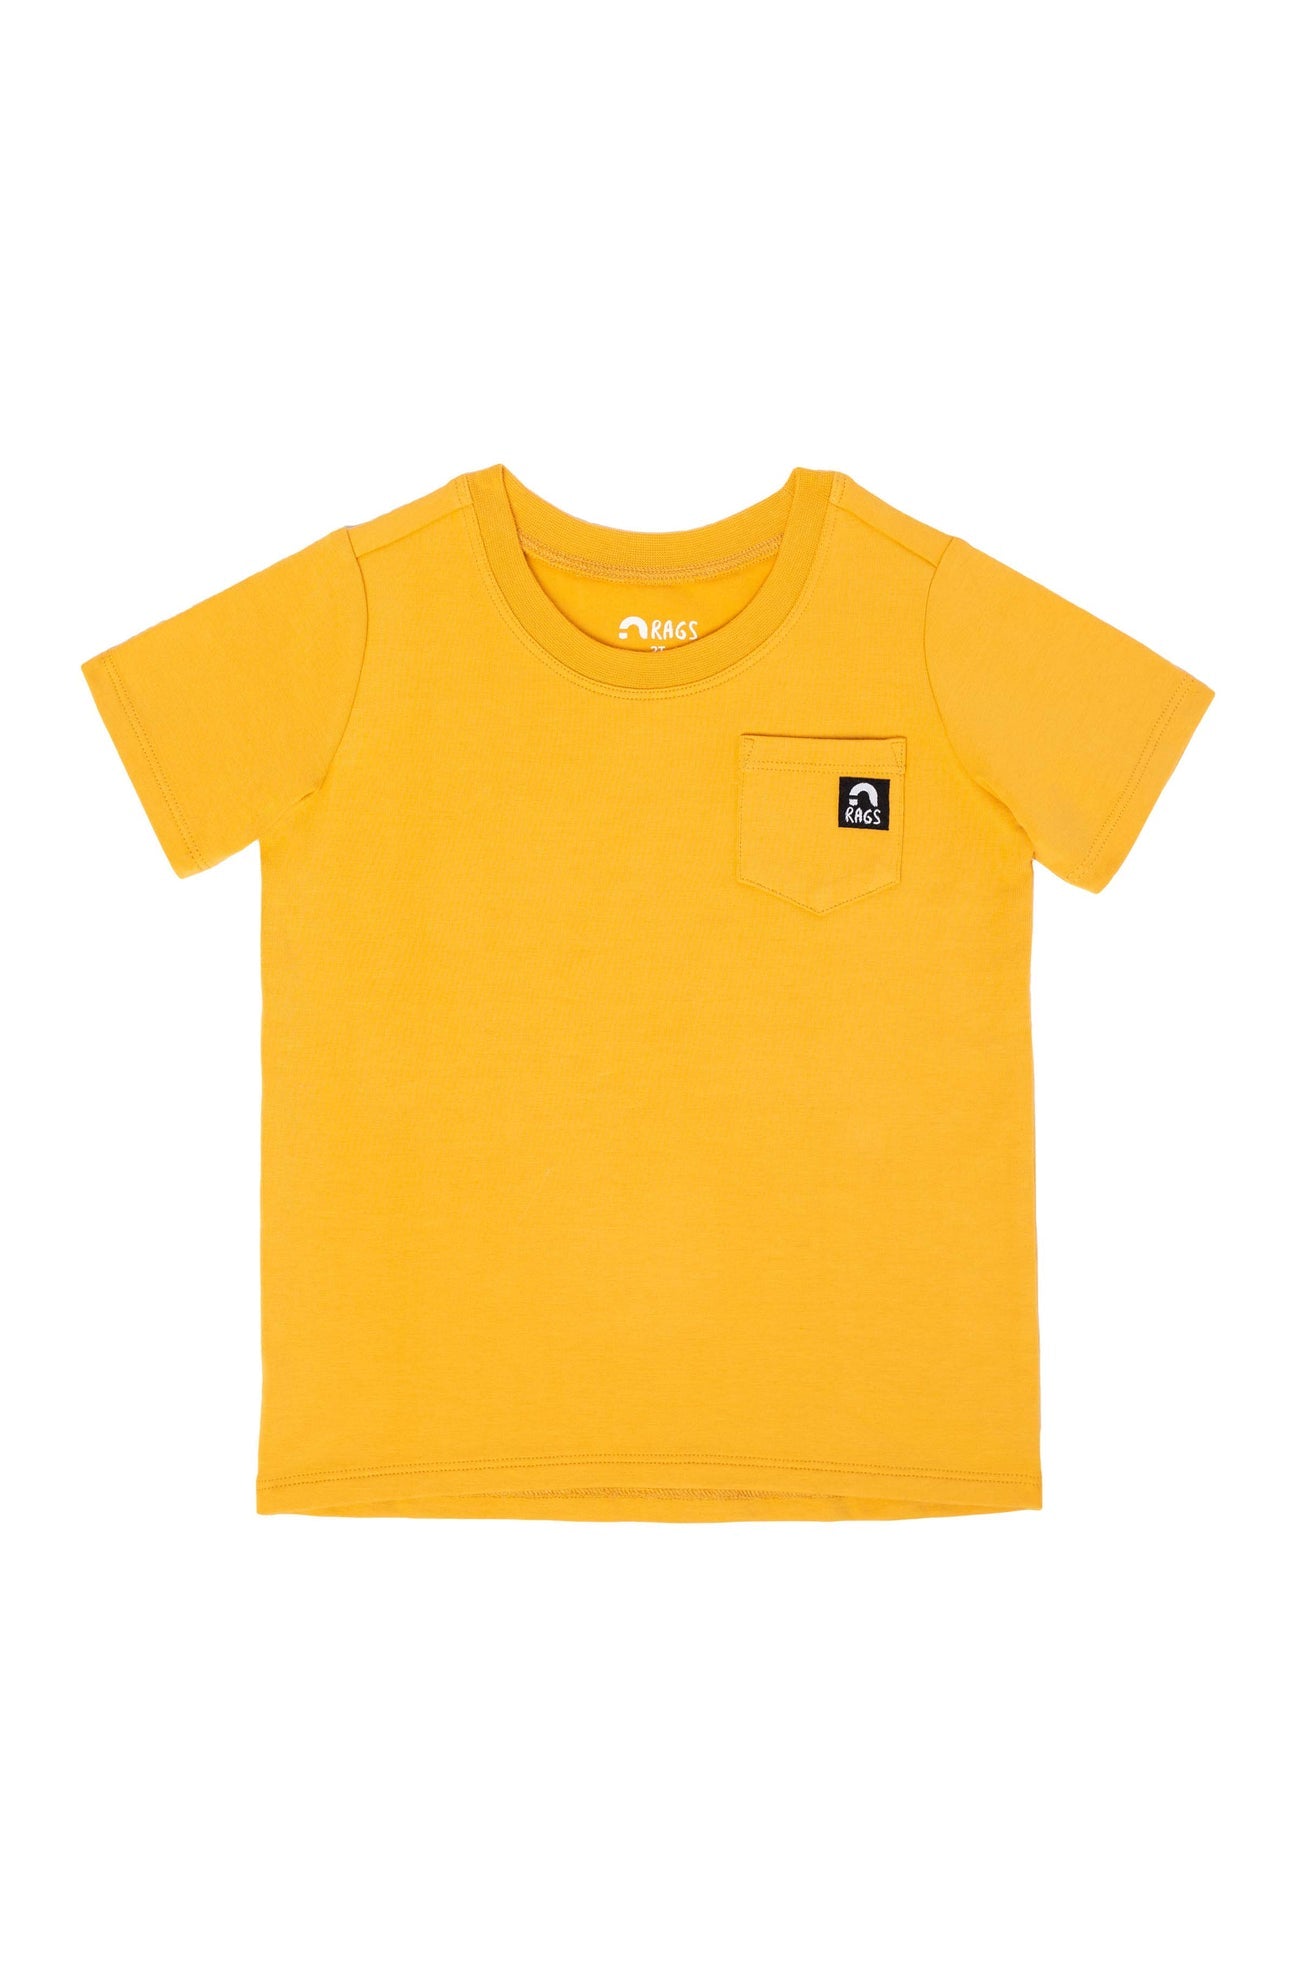 Essentials Short Sleeve Chest Pocket Rounded Tee - 'Honey' TheT43Shop